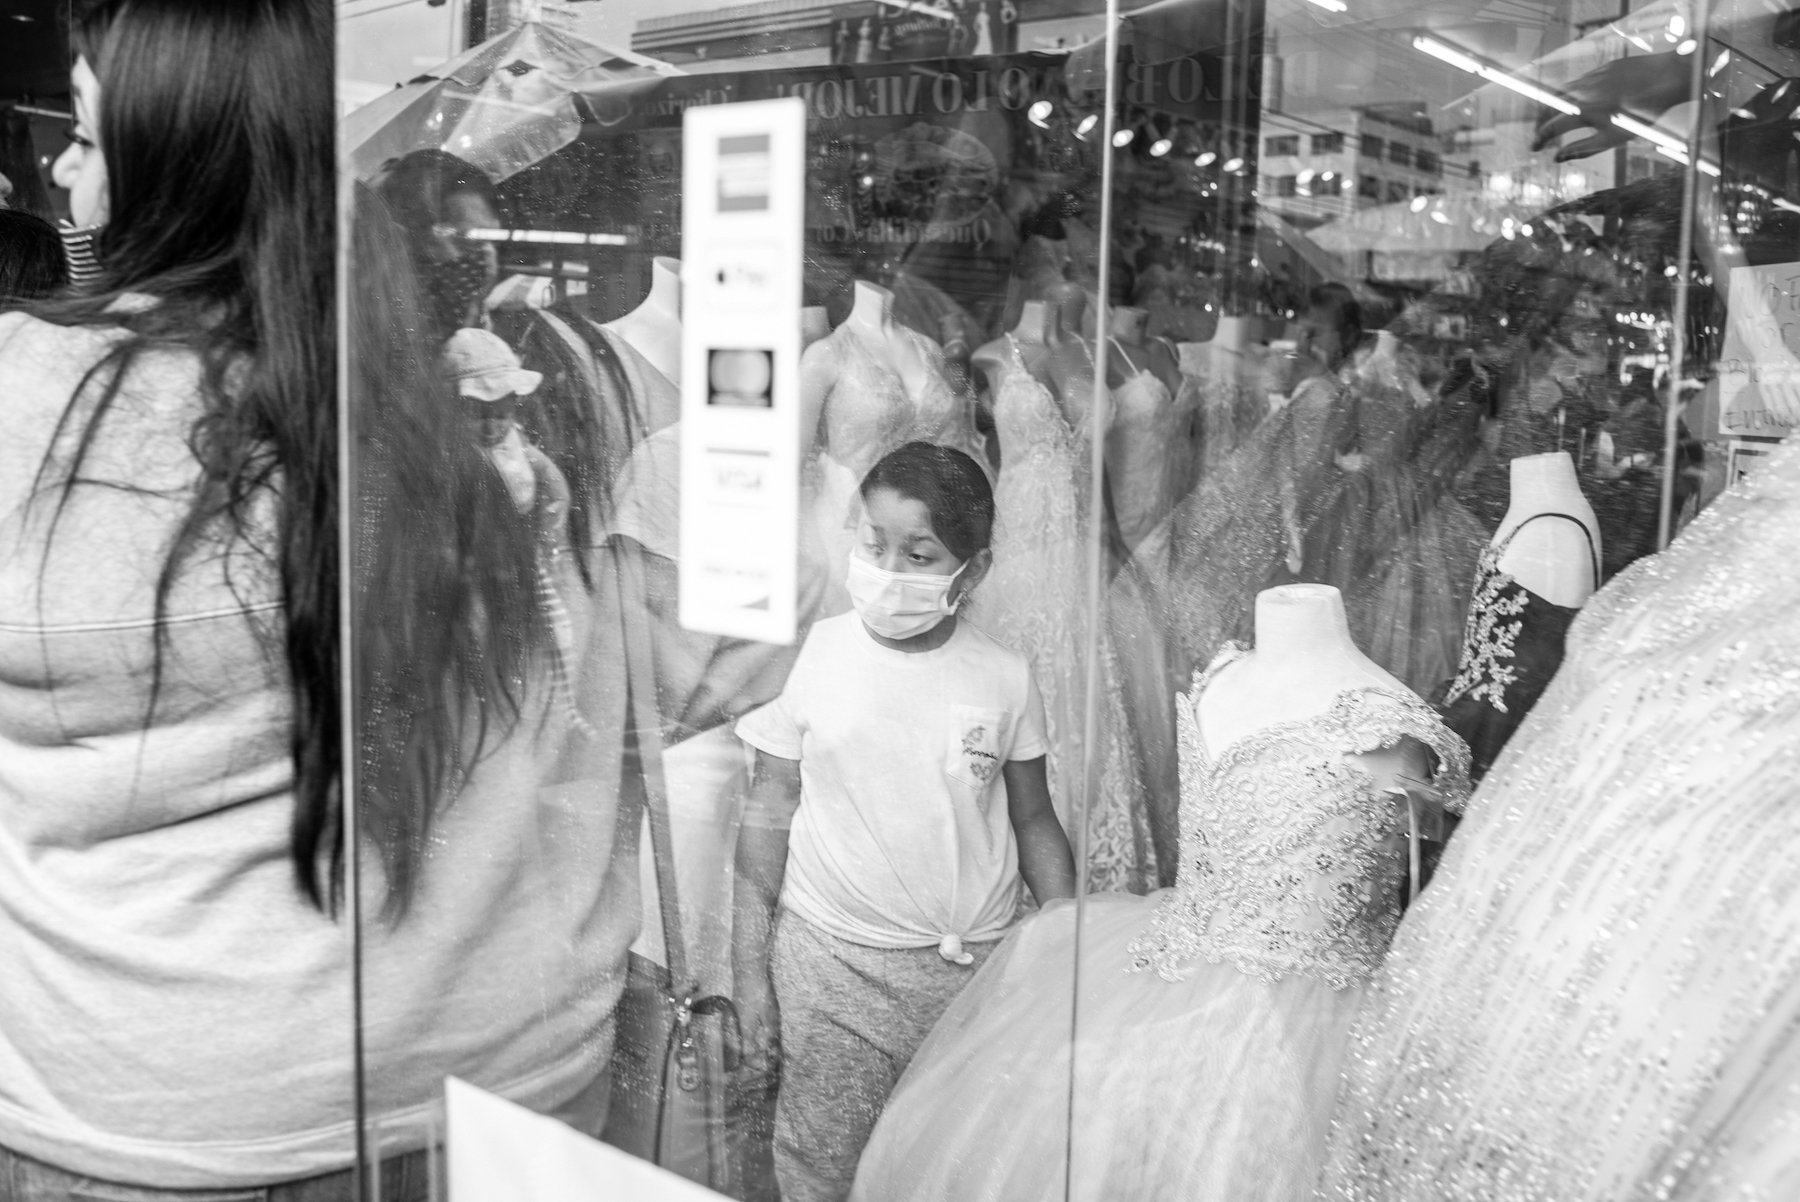  A young girl looks into the crowded street from inside a dress store in the Santee Alley outdoor markets in downtown, as COVID-19 restrictions eased. (Los Angeles, California, 2021). © Pablo Unzueta 